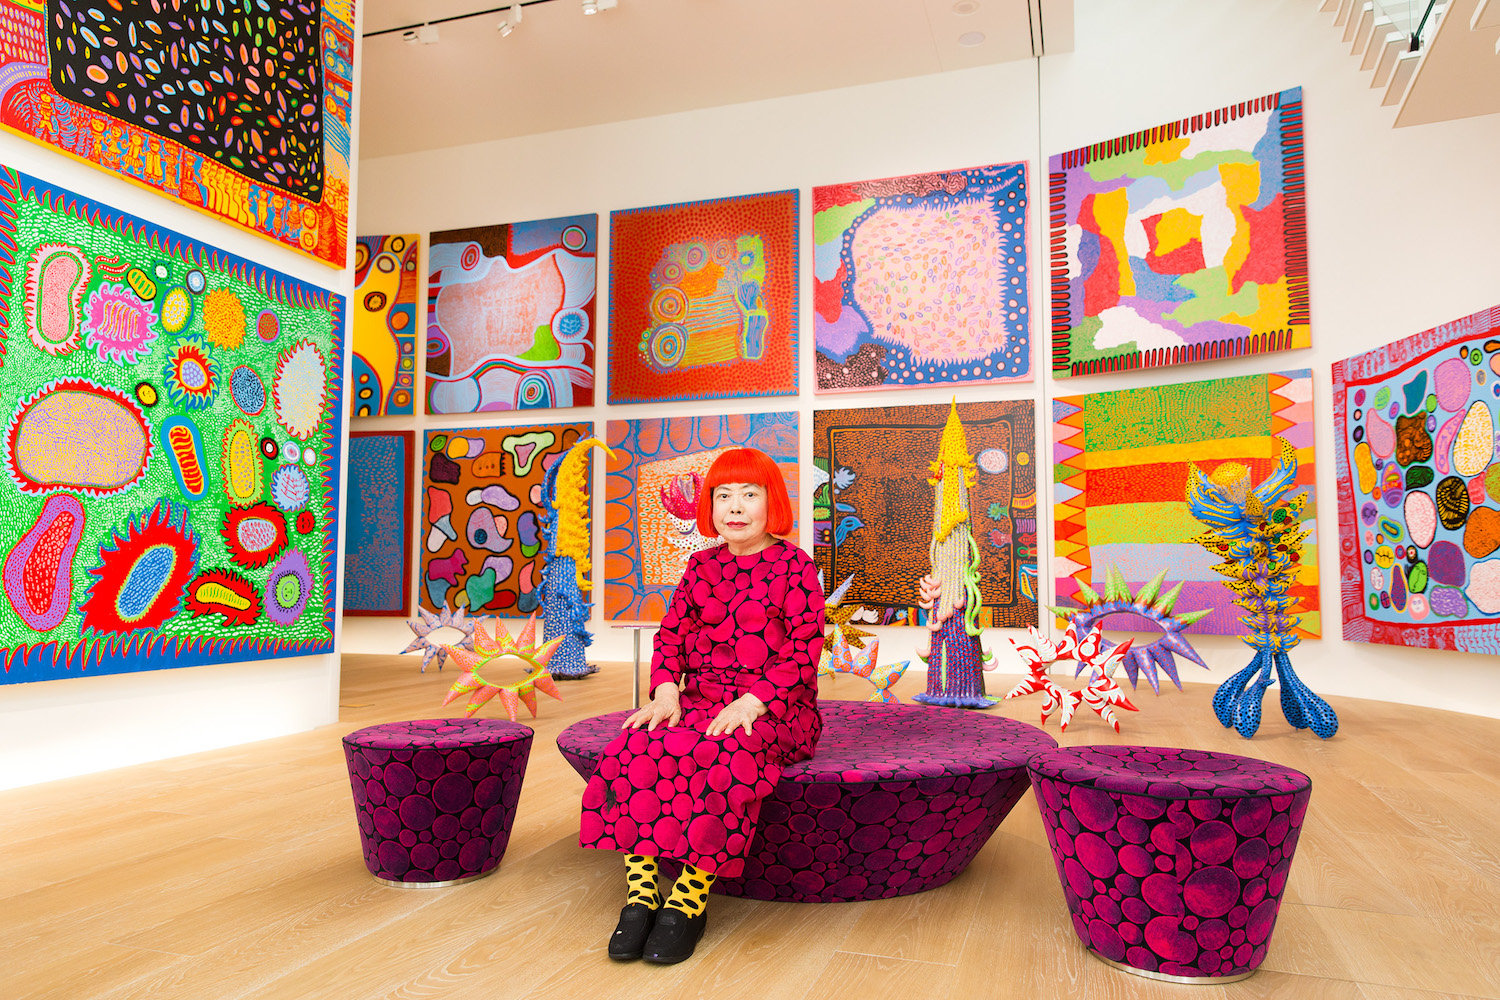 Yayoi Kusama opens her own museum in Tokyo - Curbed